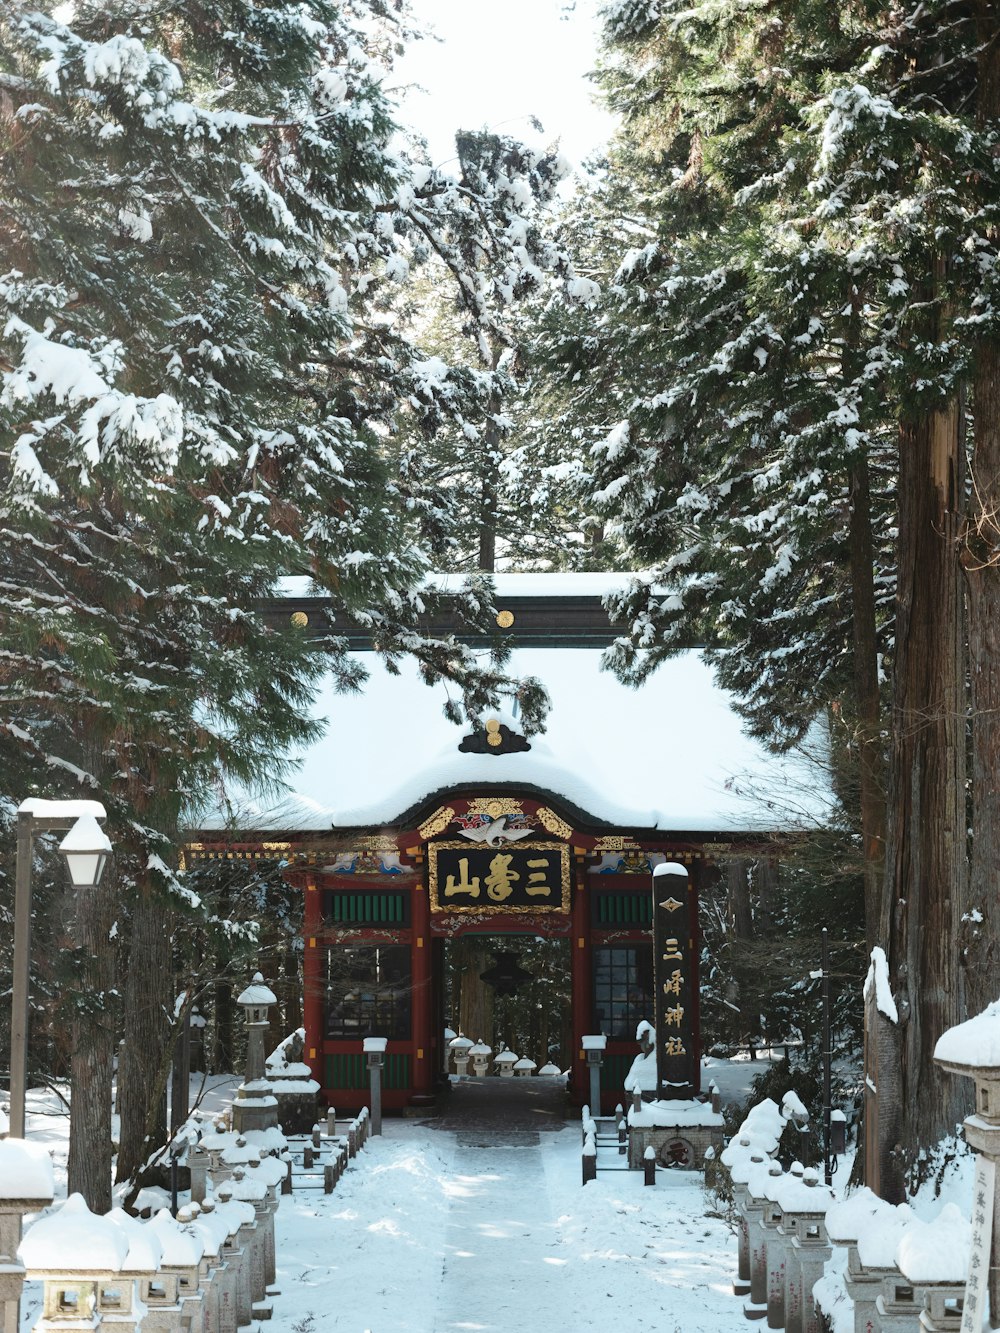 a small shrine in the middle of a snowy forest